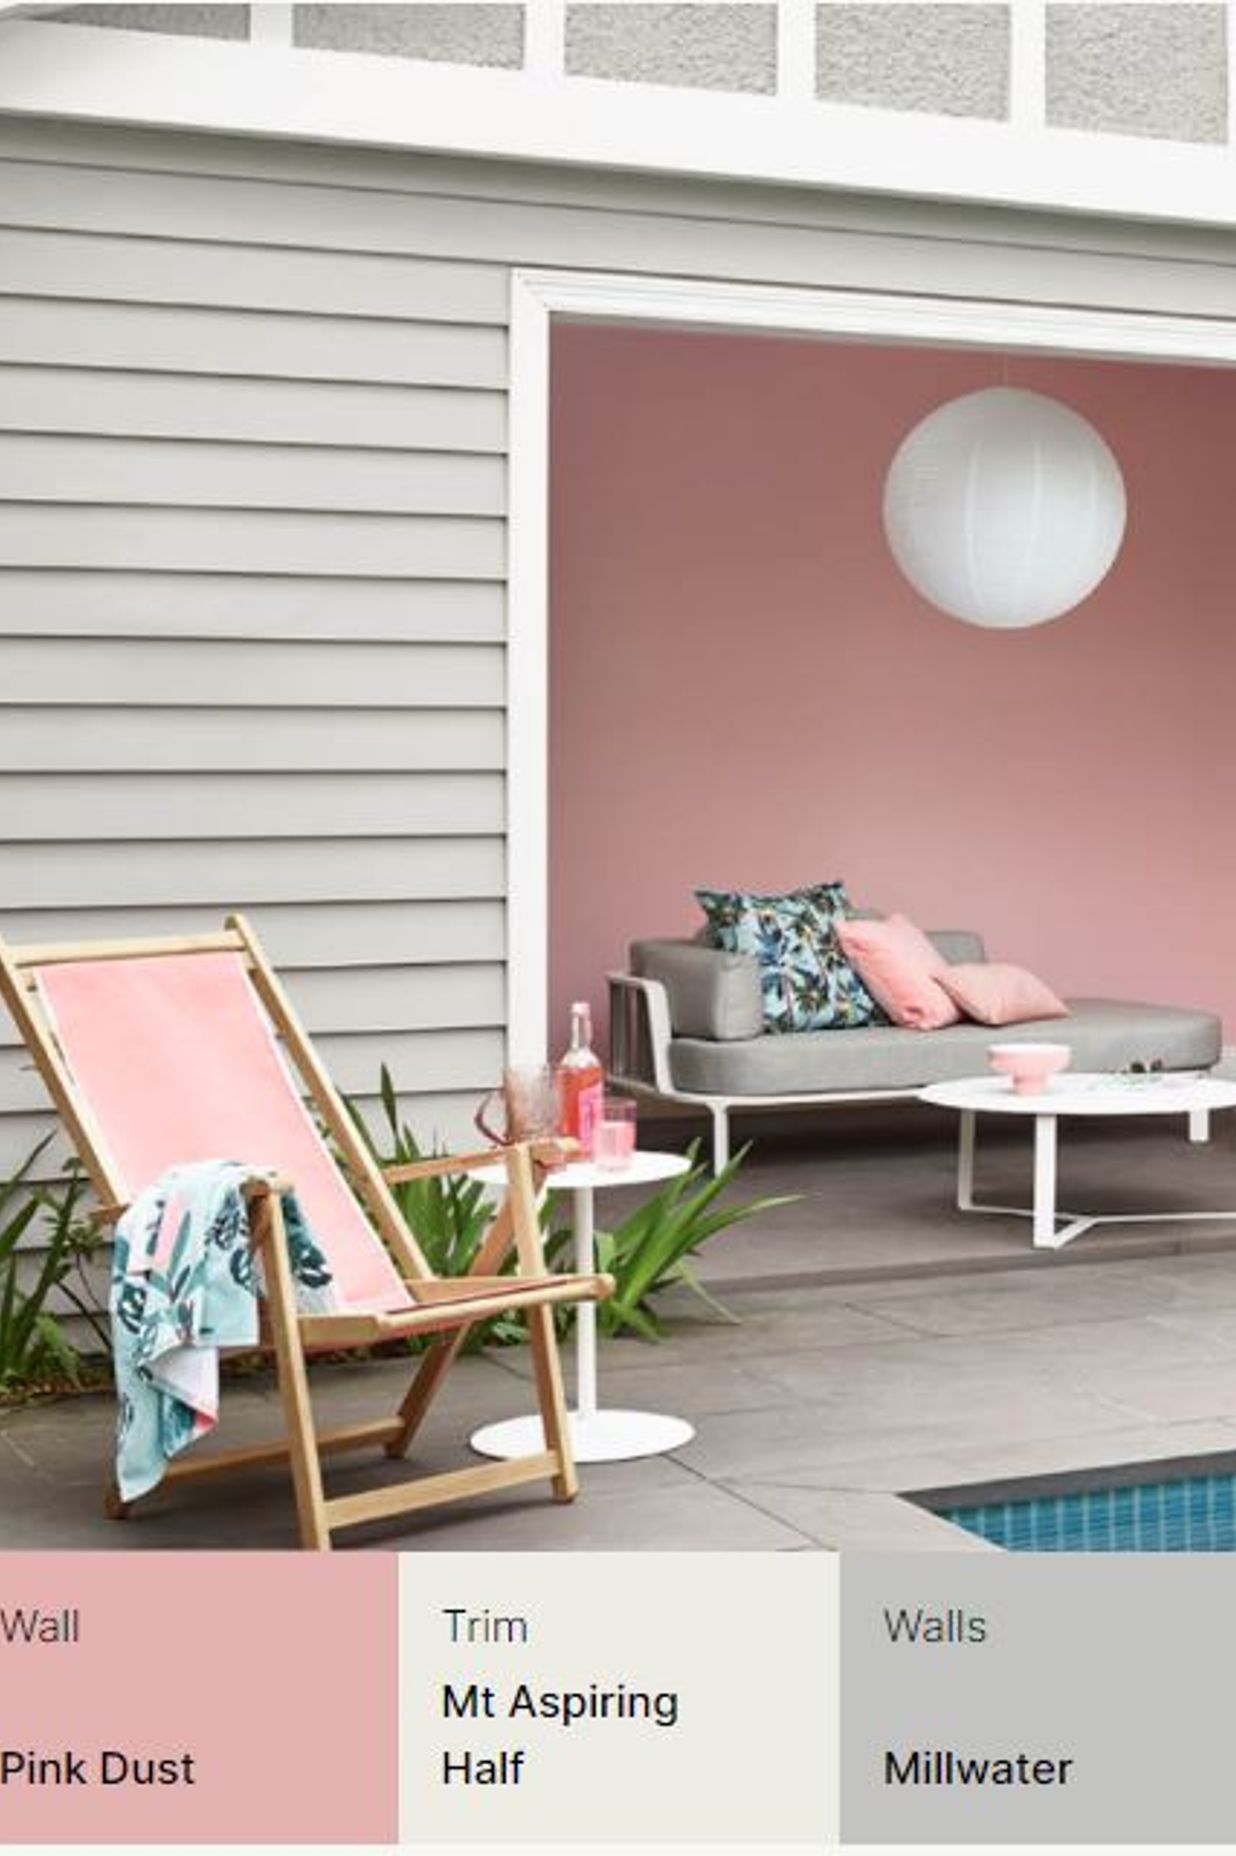 Changing the outdoor area – this is the perfect time to paint!